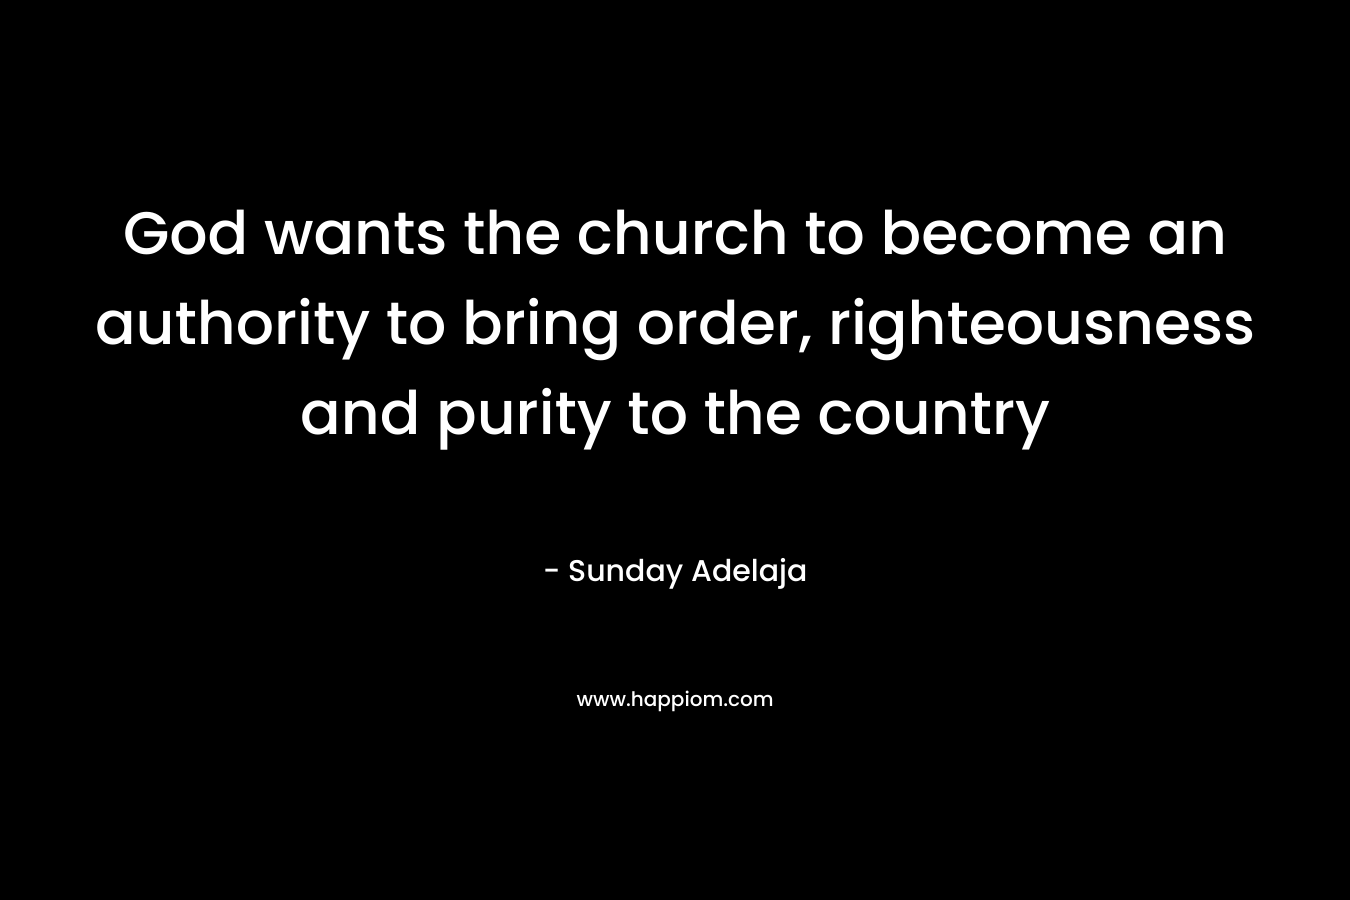 God wants the church to become an authority to bring order, righteousness and purity to the country – Sunday Adelaja